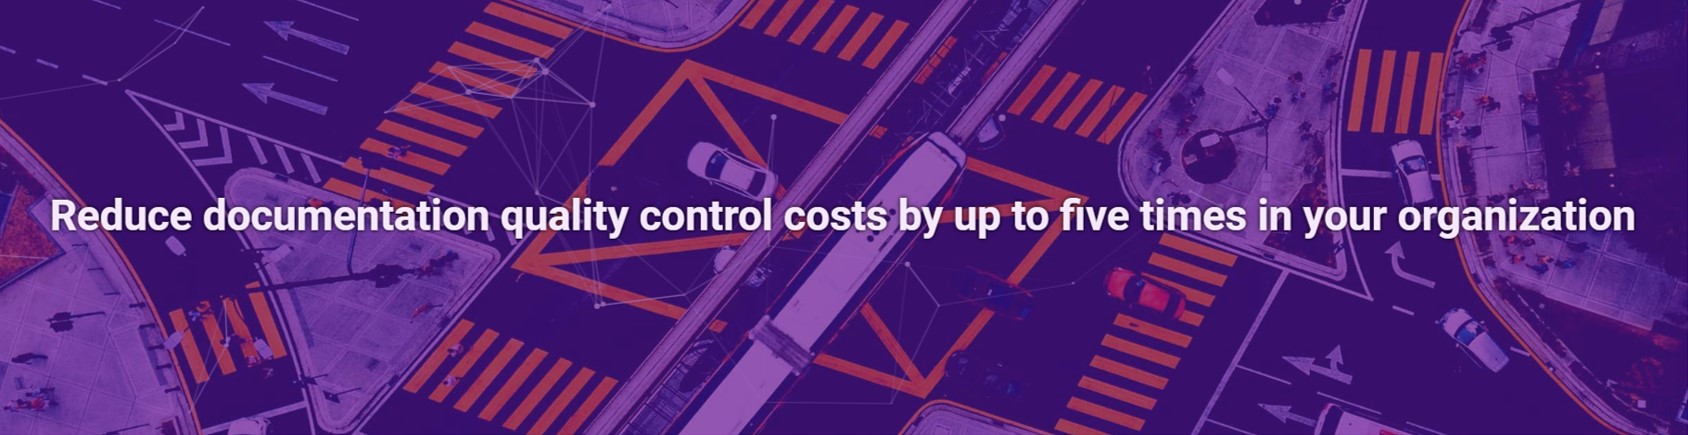 Reduce documentation quality control costs by up to five times in your organization